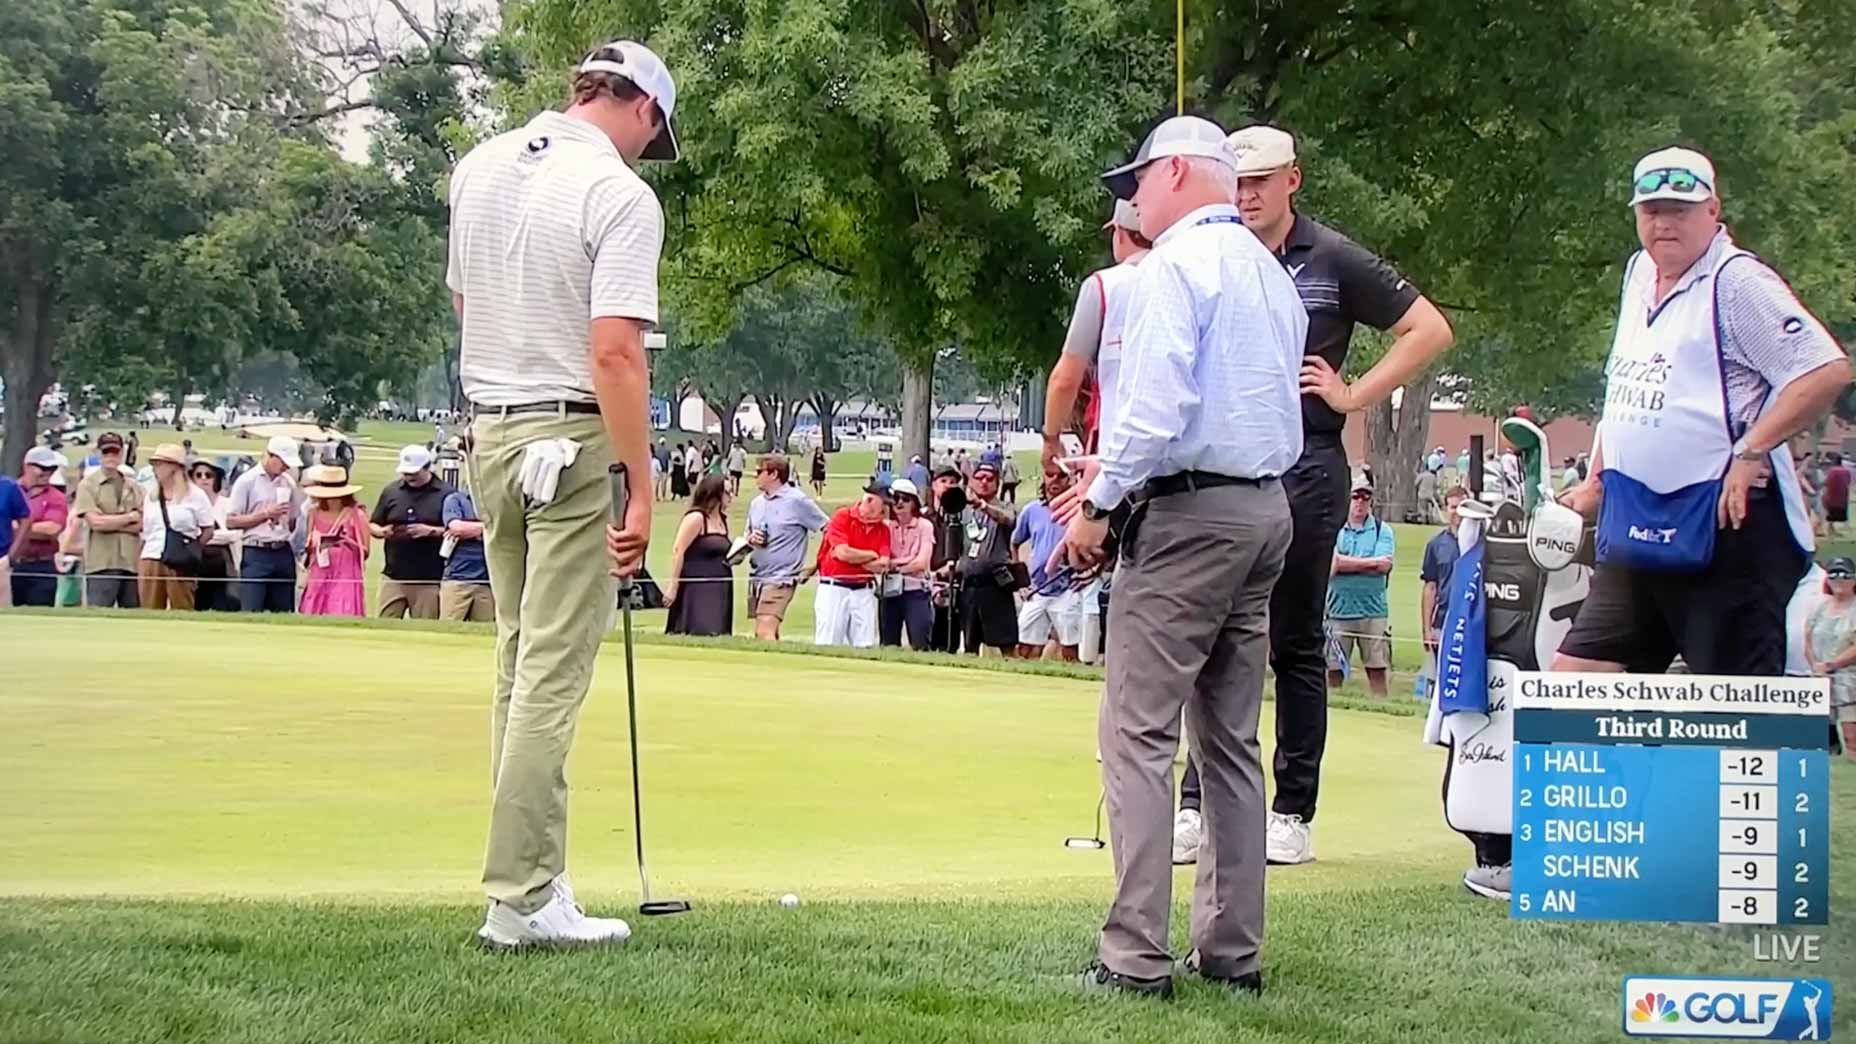 Harris English discusses a rules situation with a PGA Tour rules official during the Charles Schwab Challenge.